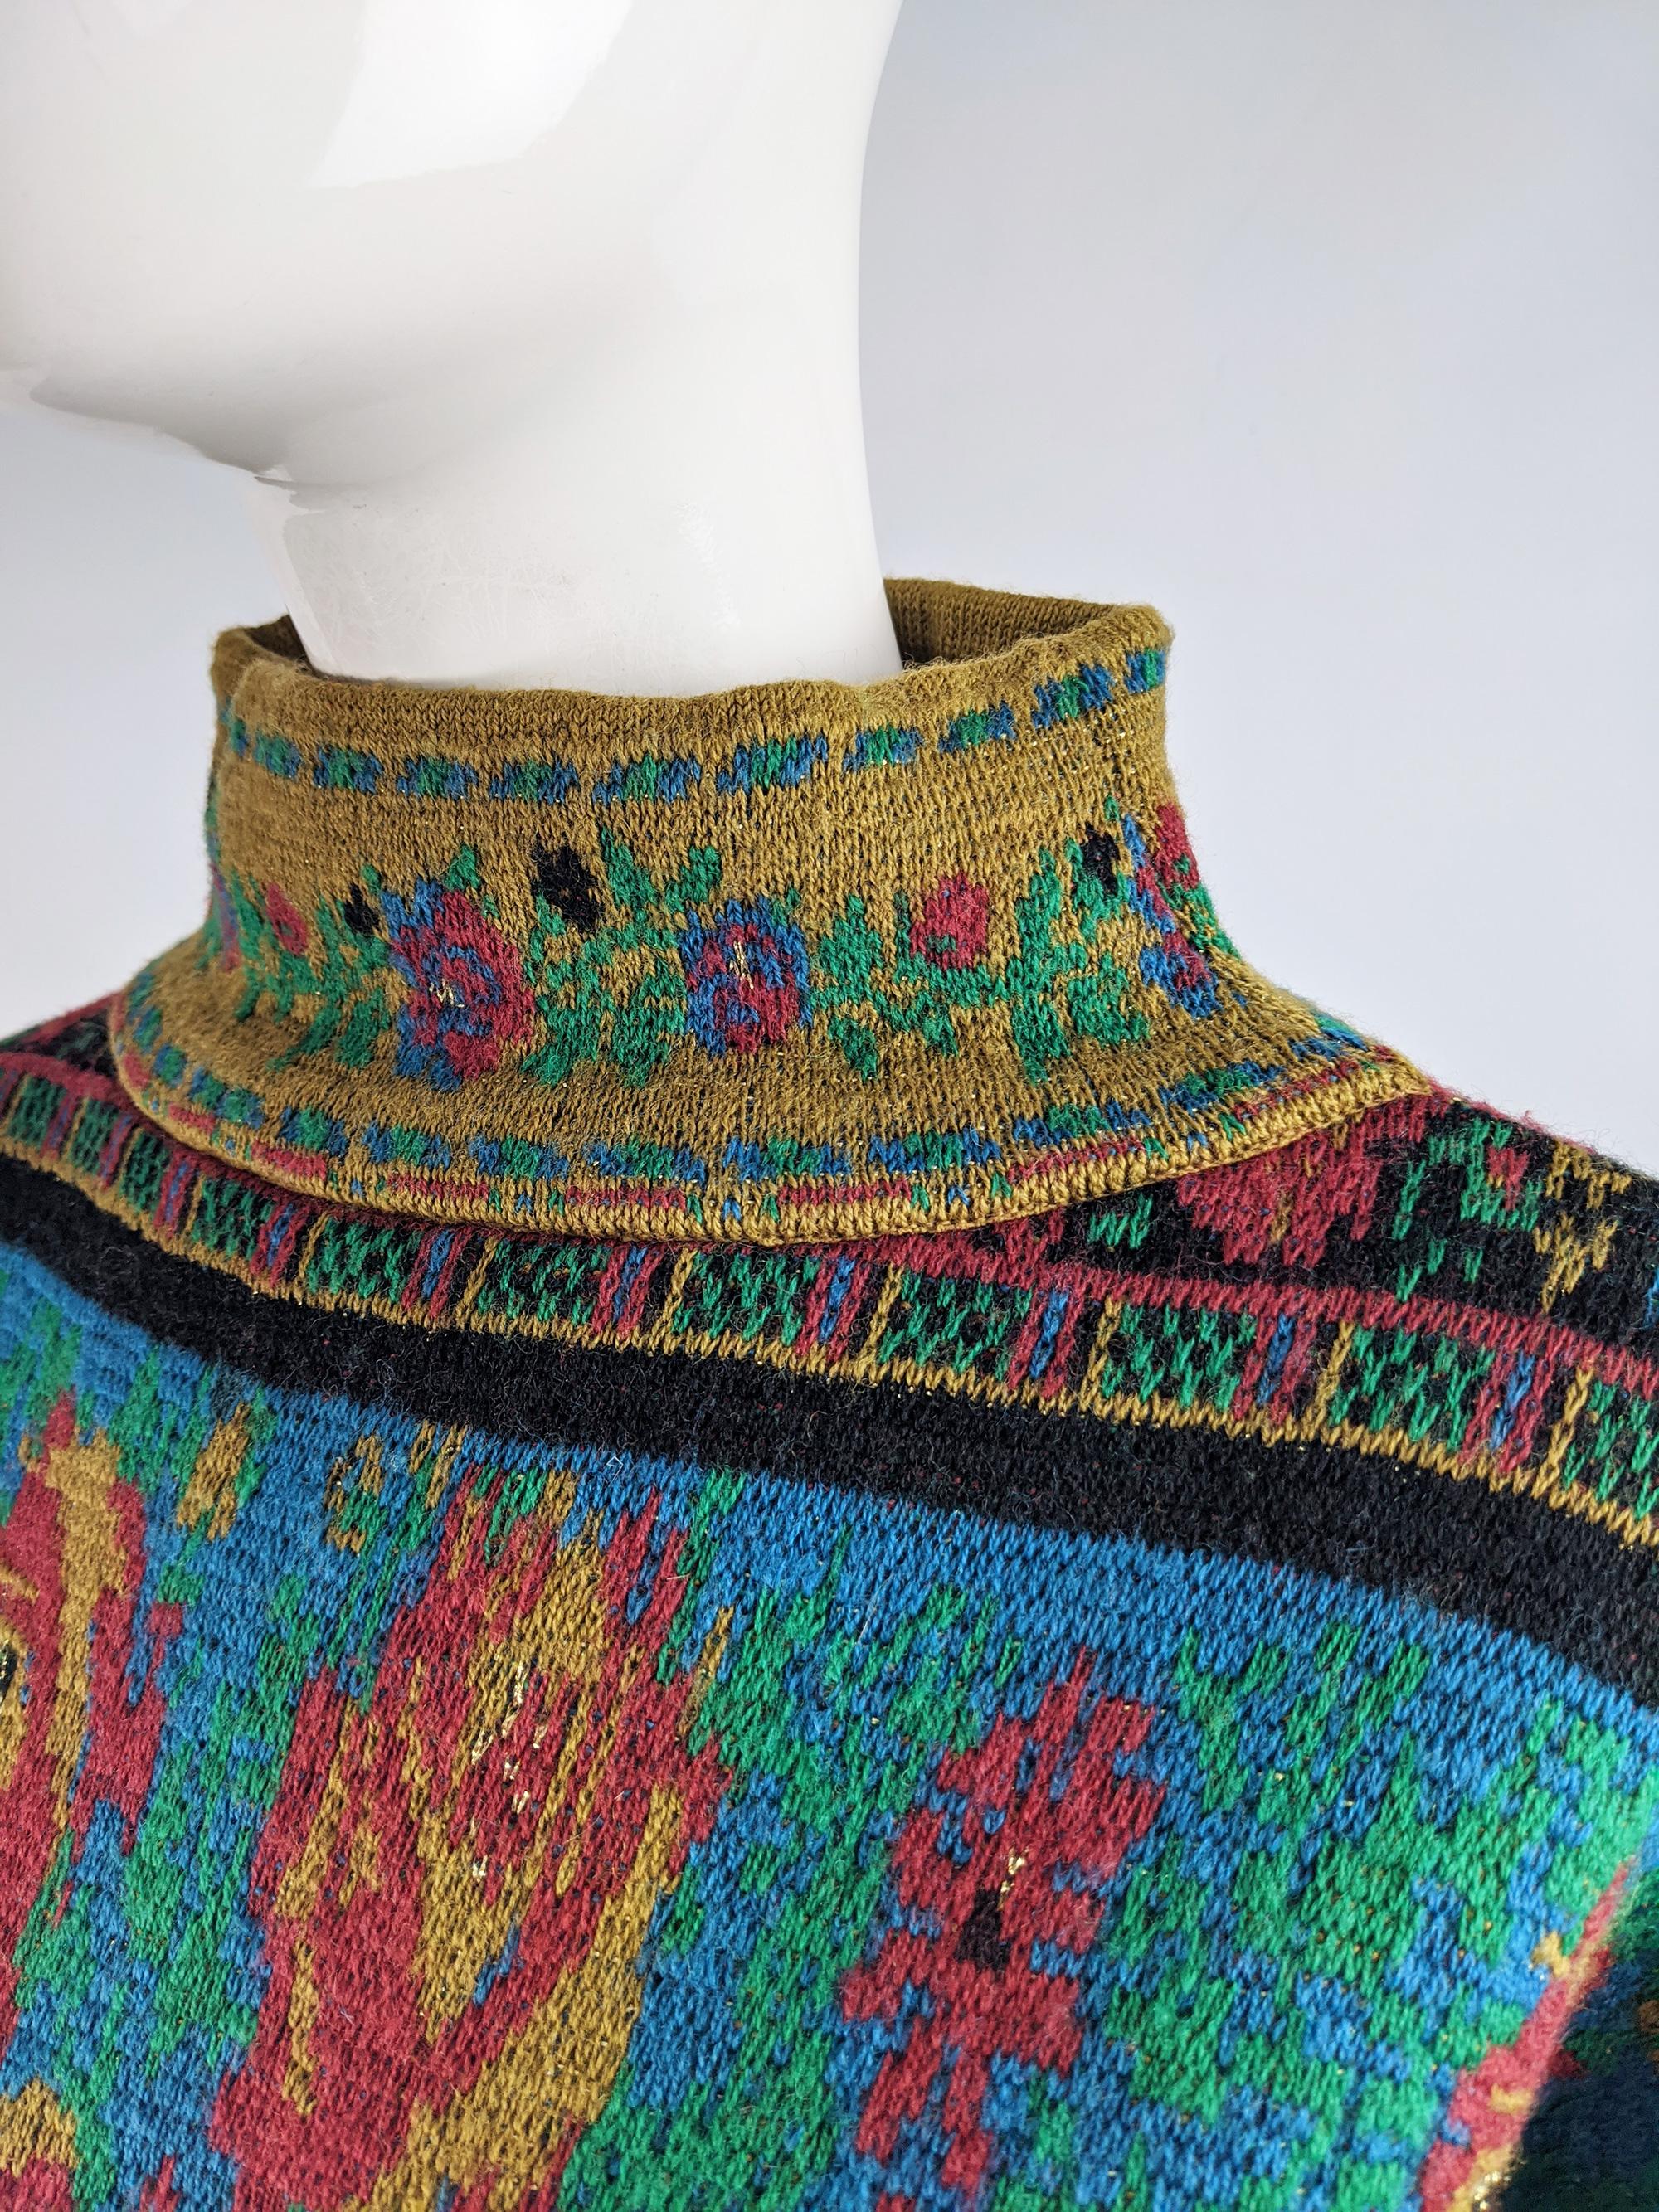 Kenzo Vintage Wool Knit Sweater Dress, 1980s In Good Condition For Sale In Doncaster, South Yorkshire